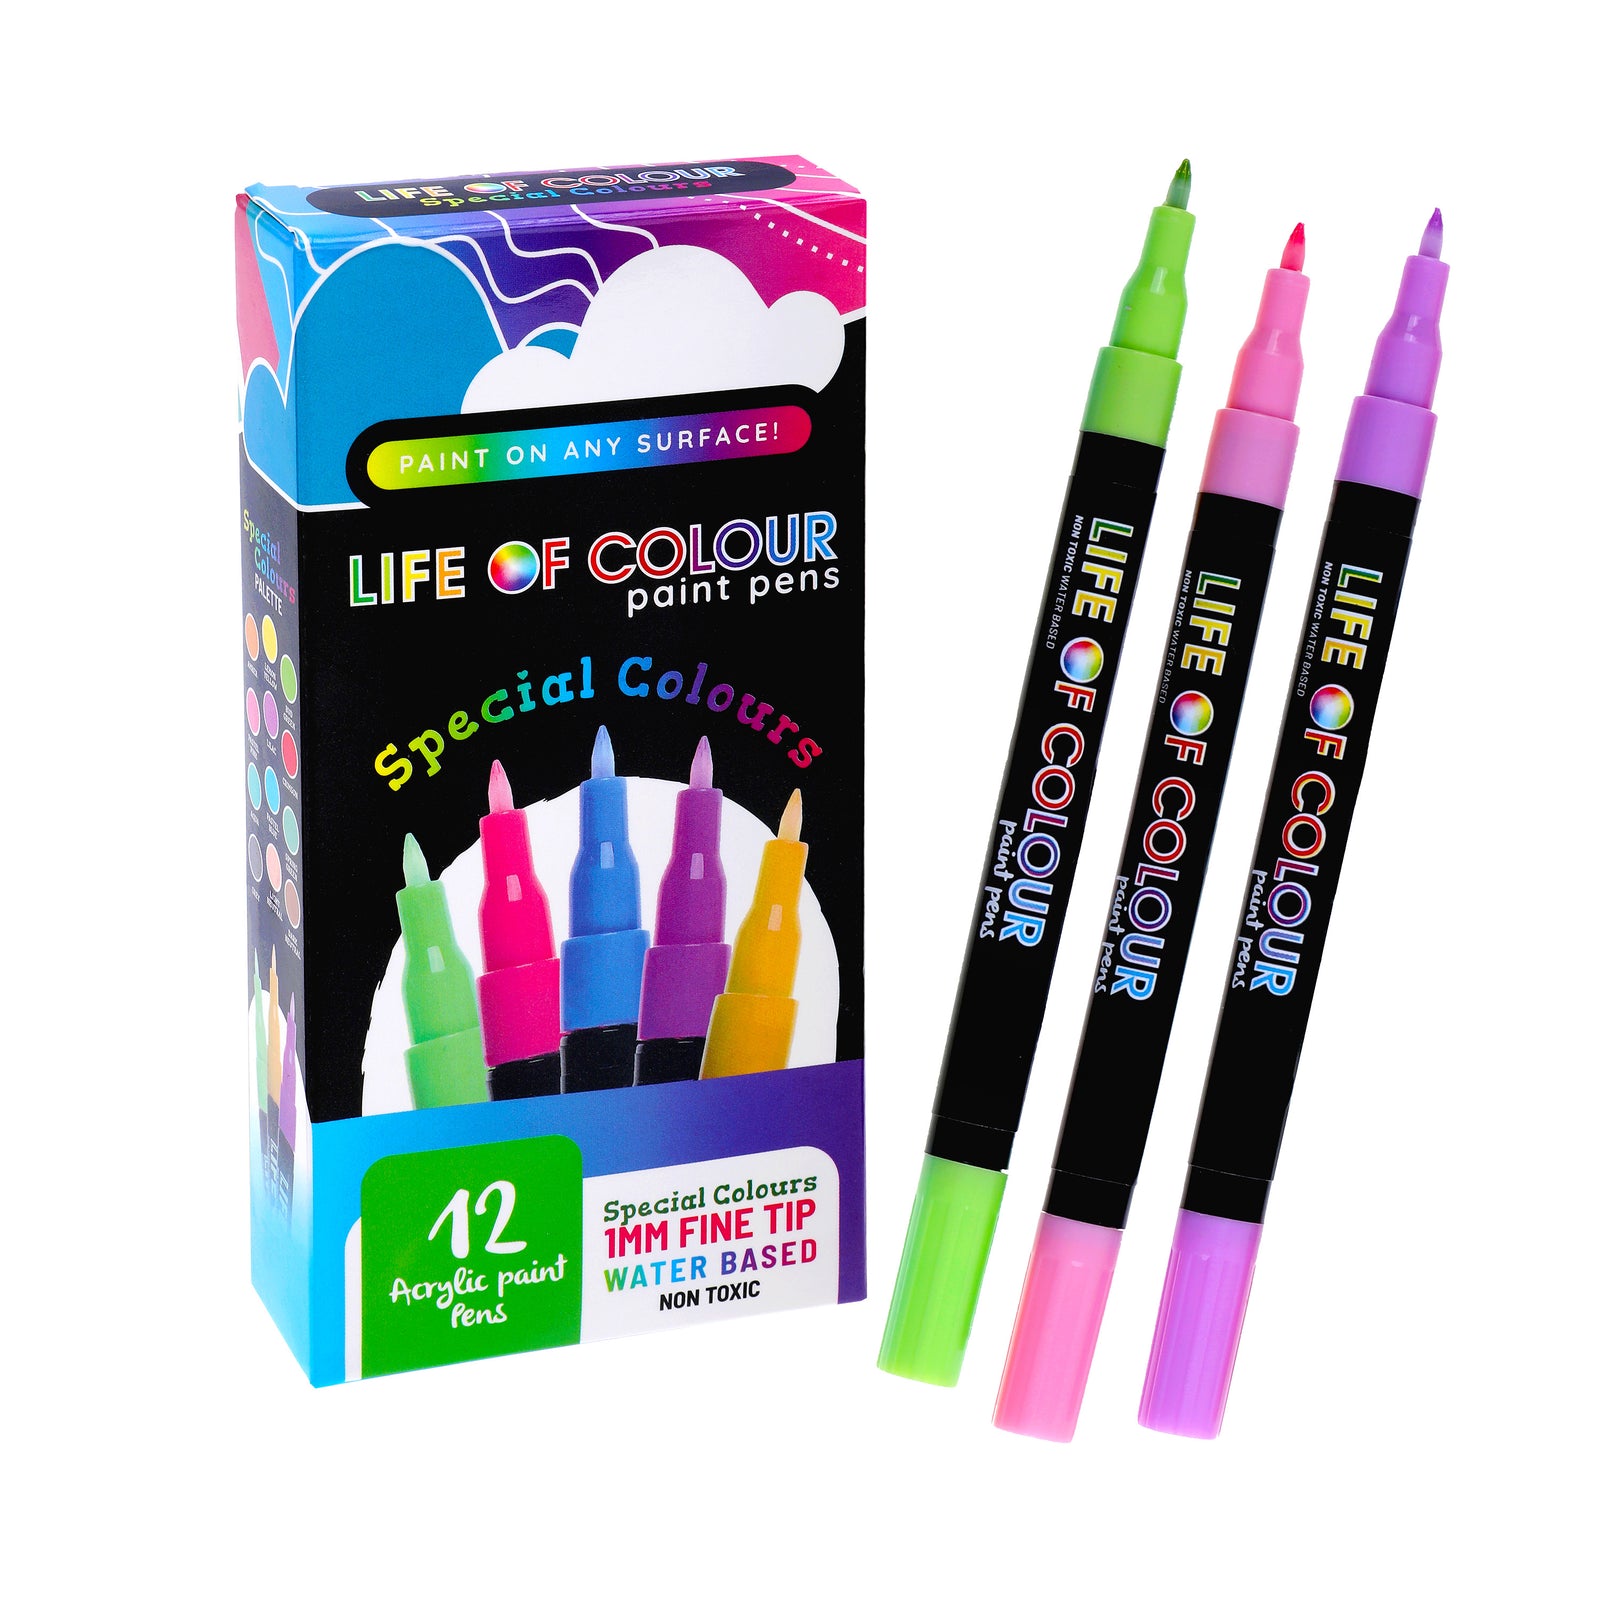 https://cdn.shopify.com/s/files/1/2374/1375/products/life-of-colour-acrylic-paint-pens_special-colours-1mm_1600x.jpg?v=1677468063